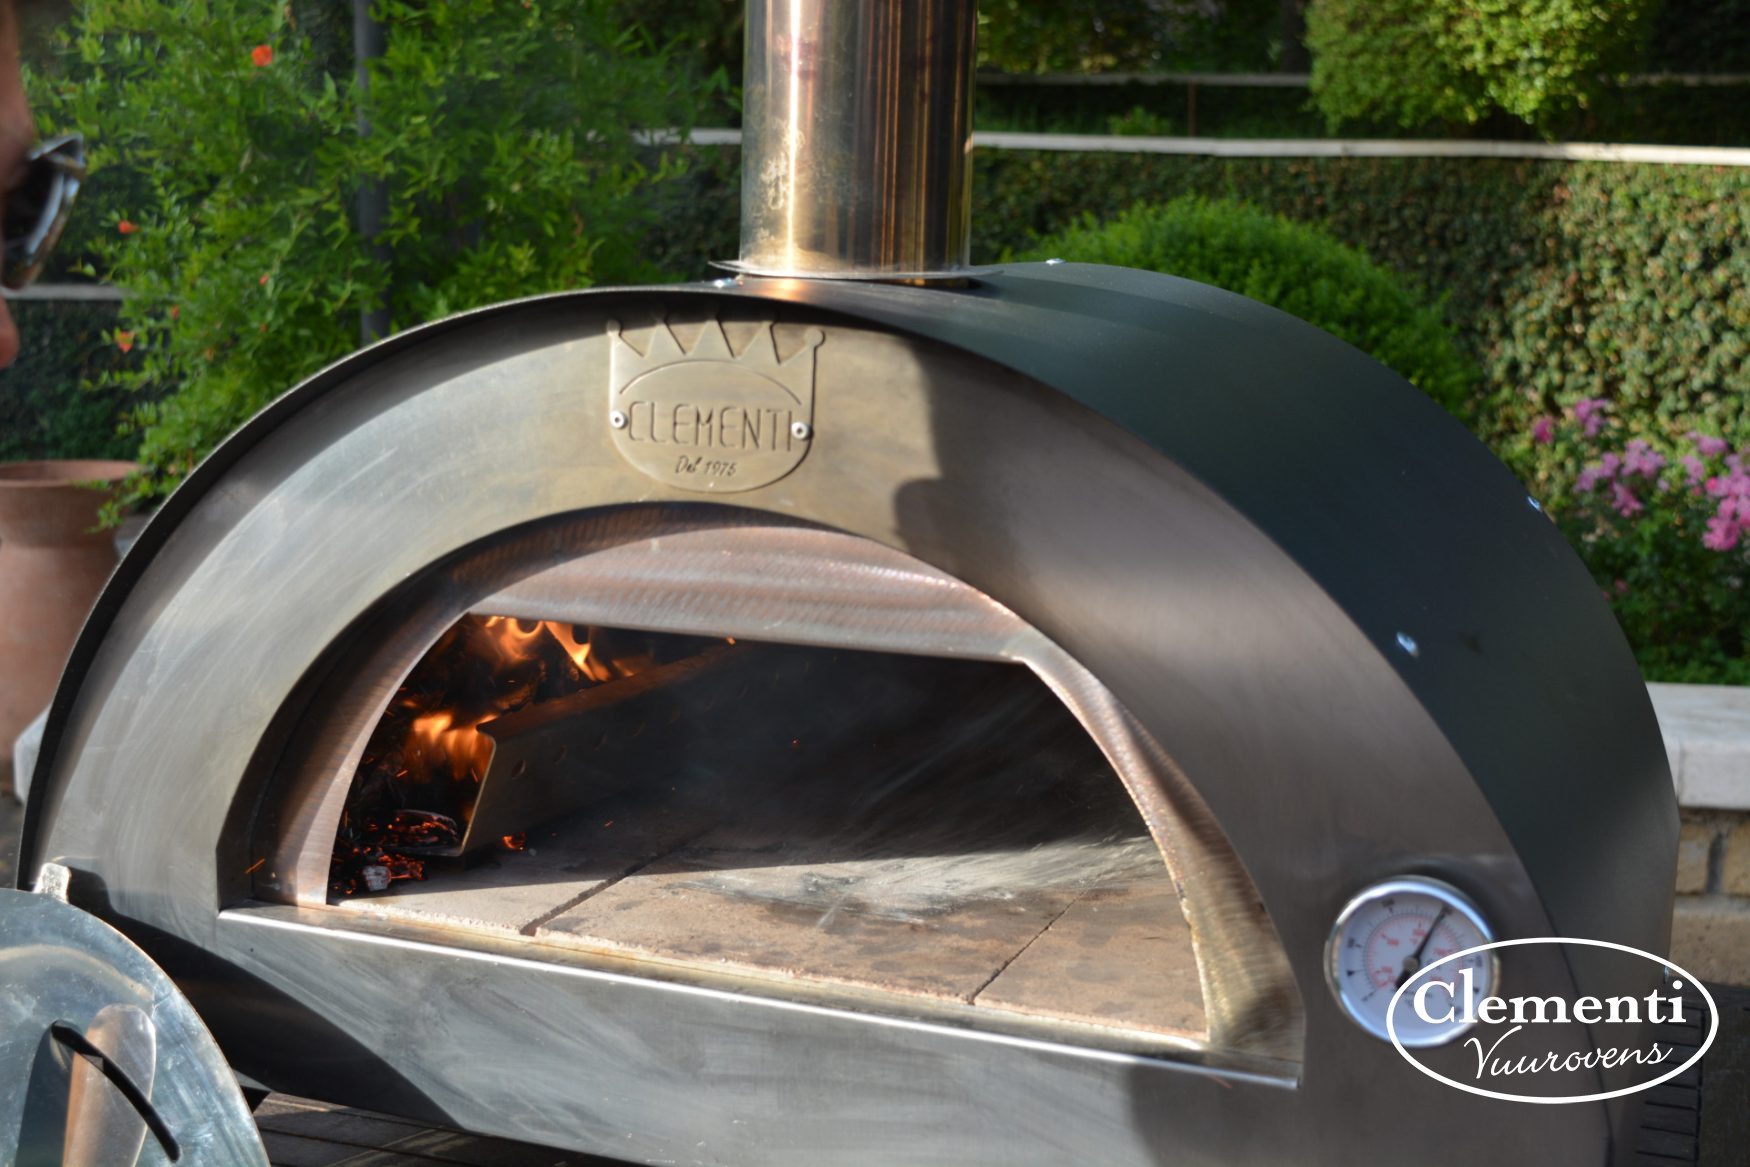 Corporation droog salade Clementino Houtoven - mini Pizza-oven van Clementi